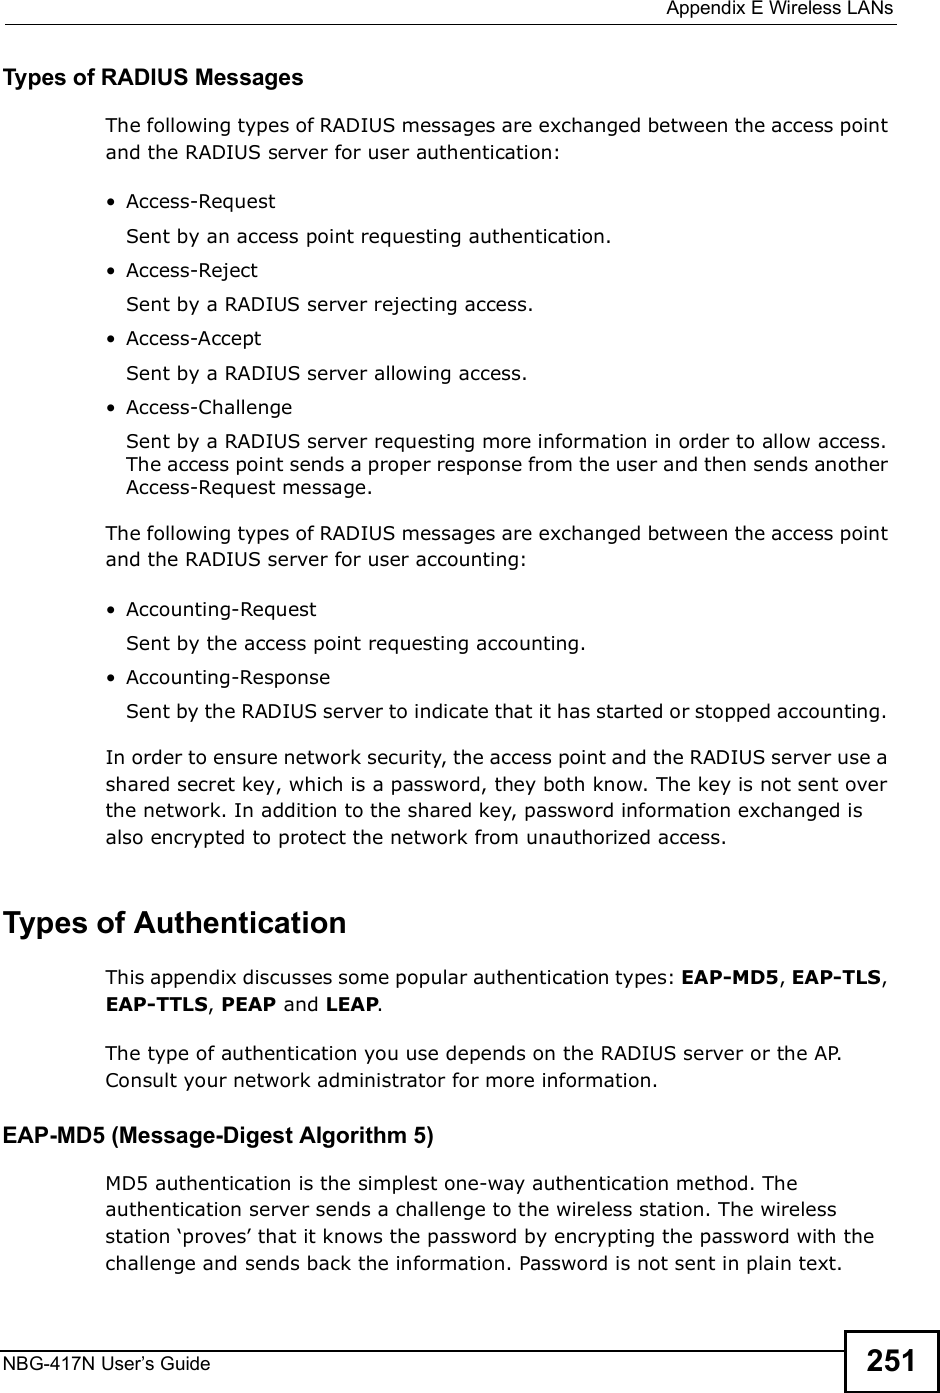  Appendix EWireless LANsNBG-417N User s Guide 251Types of RADIUS MessagesThe following types of RADIUS messages are exchanged between the access point and the RADIUS server for user authentication: Access-RequestSent by an access point requesting authentication. Access-RejectSent by a RADIUS server rejecting access. Access-AcceptSent by a RADIUS server allowing access.  Access-ChallengeSent by a RADIUS server requesting more information in order to allow access. The access point sends a proper response from the user and then sends another Access-Request message. The following types of RADIUS messages are exchanged between the access point and the RADIUS server for user accounting: Accounting-RequestSent by the access point requesting accounting. Accounting-ResponseSent by the RADIUS server to indicate that it has started or stopped accounting. In order to ensure network security, the access point and the RADIUS server use a shared secret key, which is a password, they both know. The key is not sent over the network. In addition to the shared key, password information exchanged is also encrypted to protect the network from unauthorized access. Types of Authentication This appendix discusses some popular authentication types: EAP-MD5, EAP-TLS, EAP-TTLS, PEAP and LEAP. The type of authentication you use depends on the RADIUS server or the AP. Consult your network administrator for more information.EAP-MD5 (Message-Digest Algorithm 5)MD5 authentication is the simplest one-way authentication method. The authentication server sends a challenge to the wireless station. The wireless station (proves! that it knows the password by encrypting the password with the challenge and sends back the information. Password is not sent in plain text. 